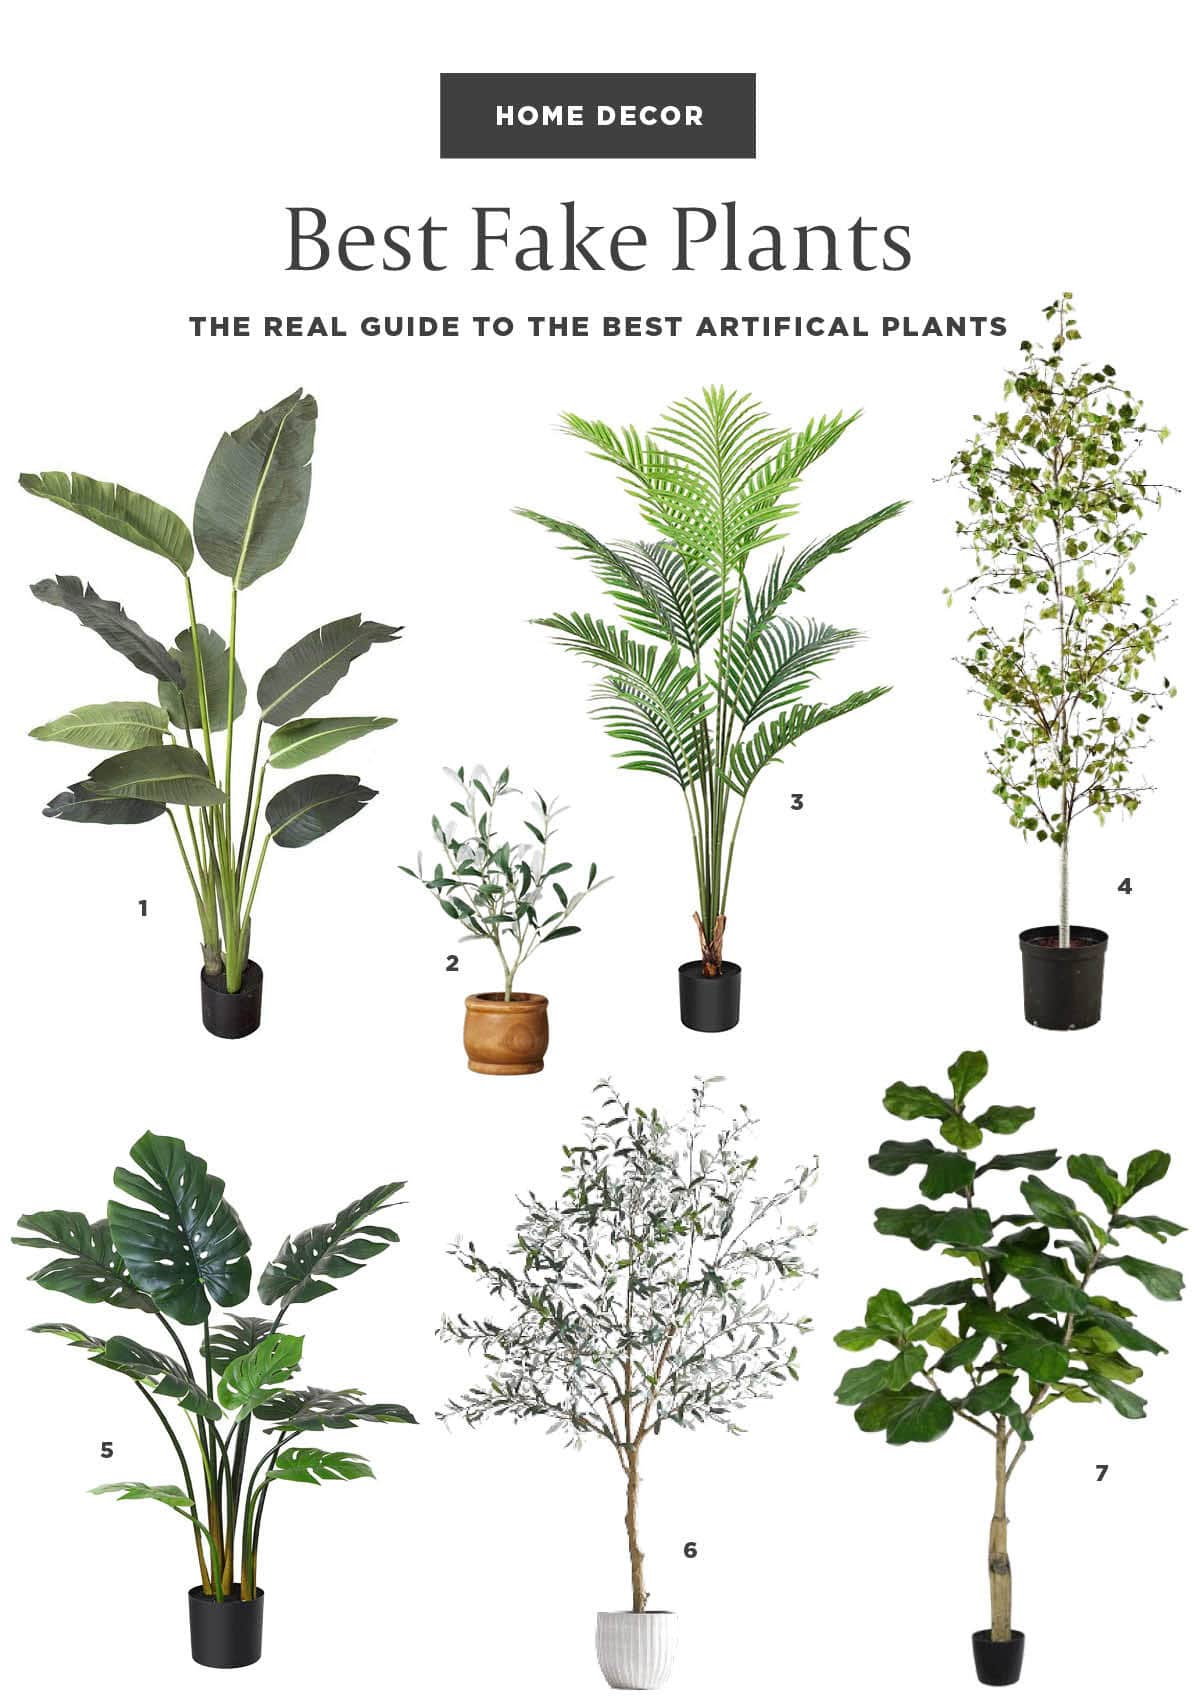 Guide to the best fake plants that look real